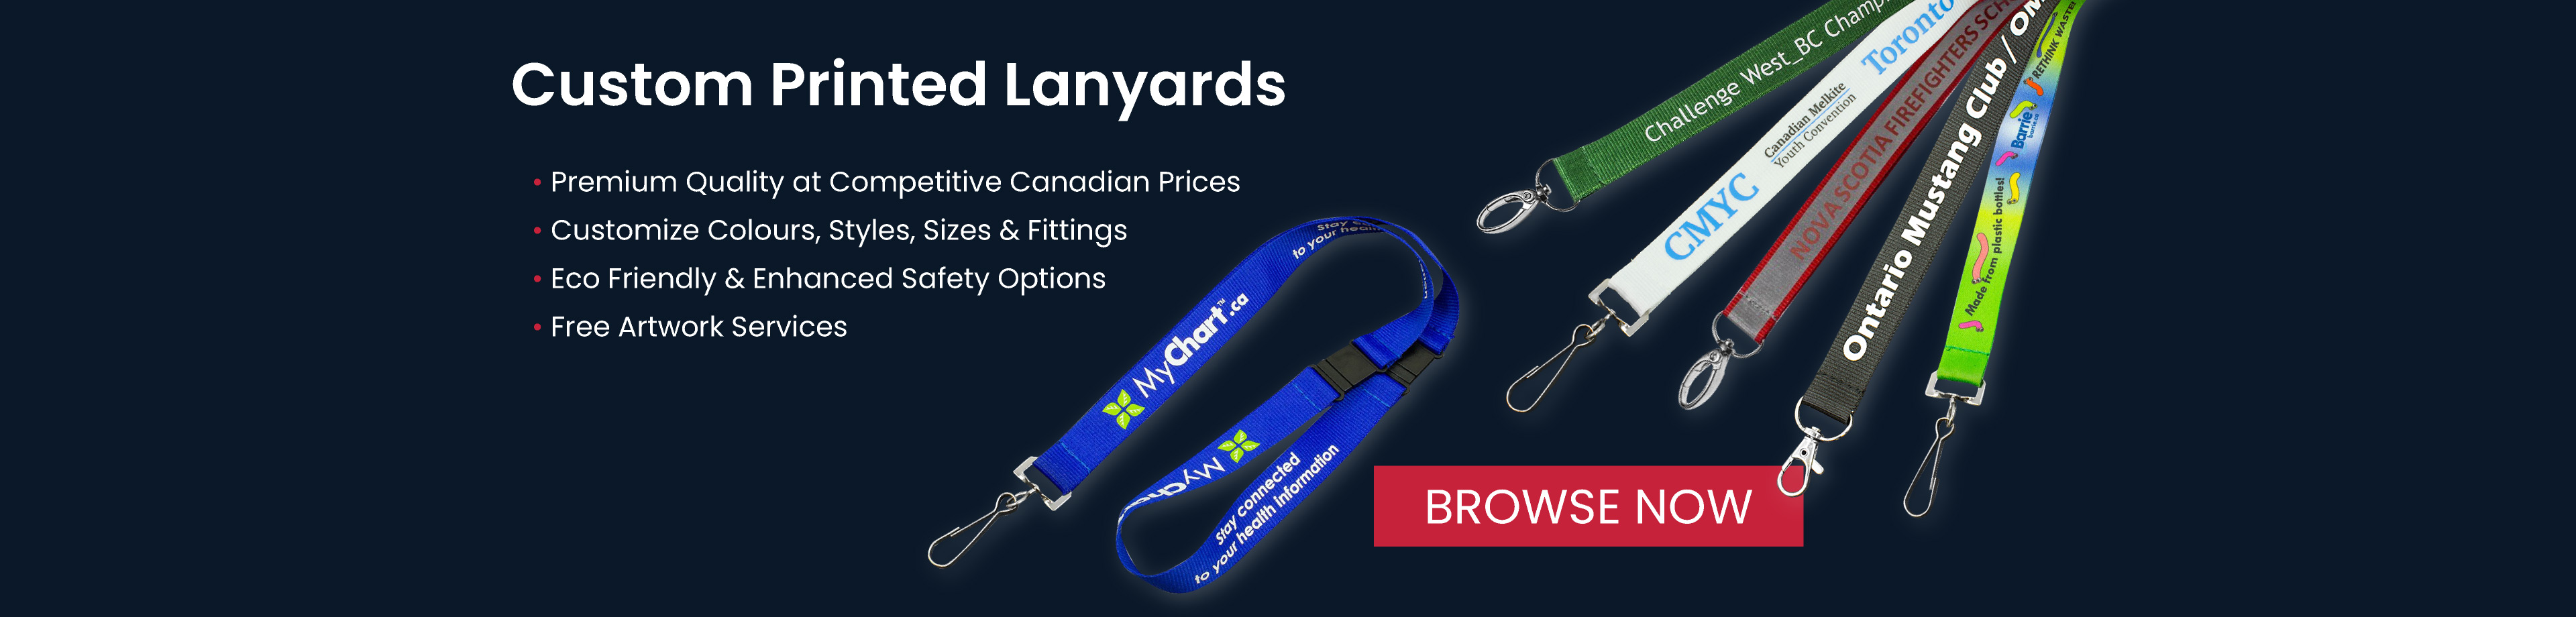 Custom Printed Lanyards – Click to browse dozens of styles, colours and print options!